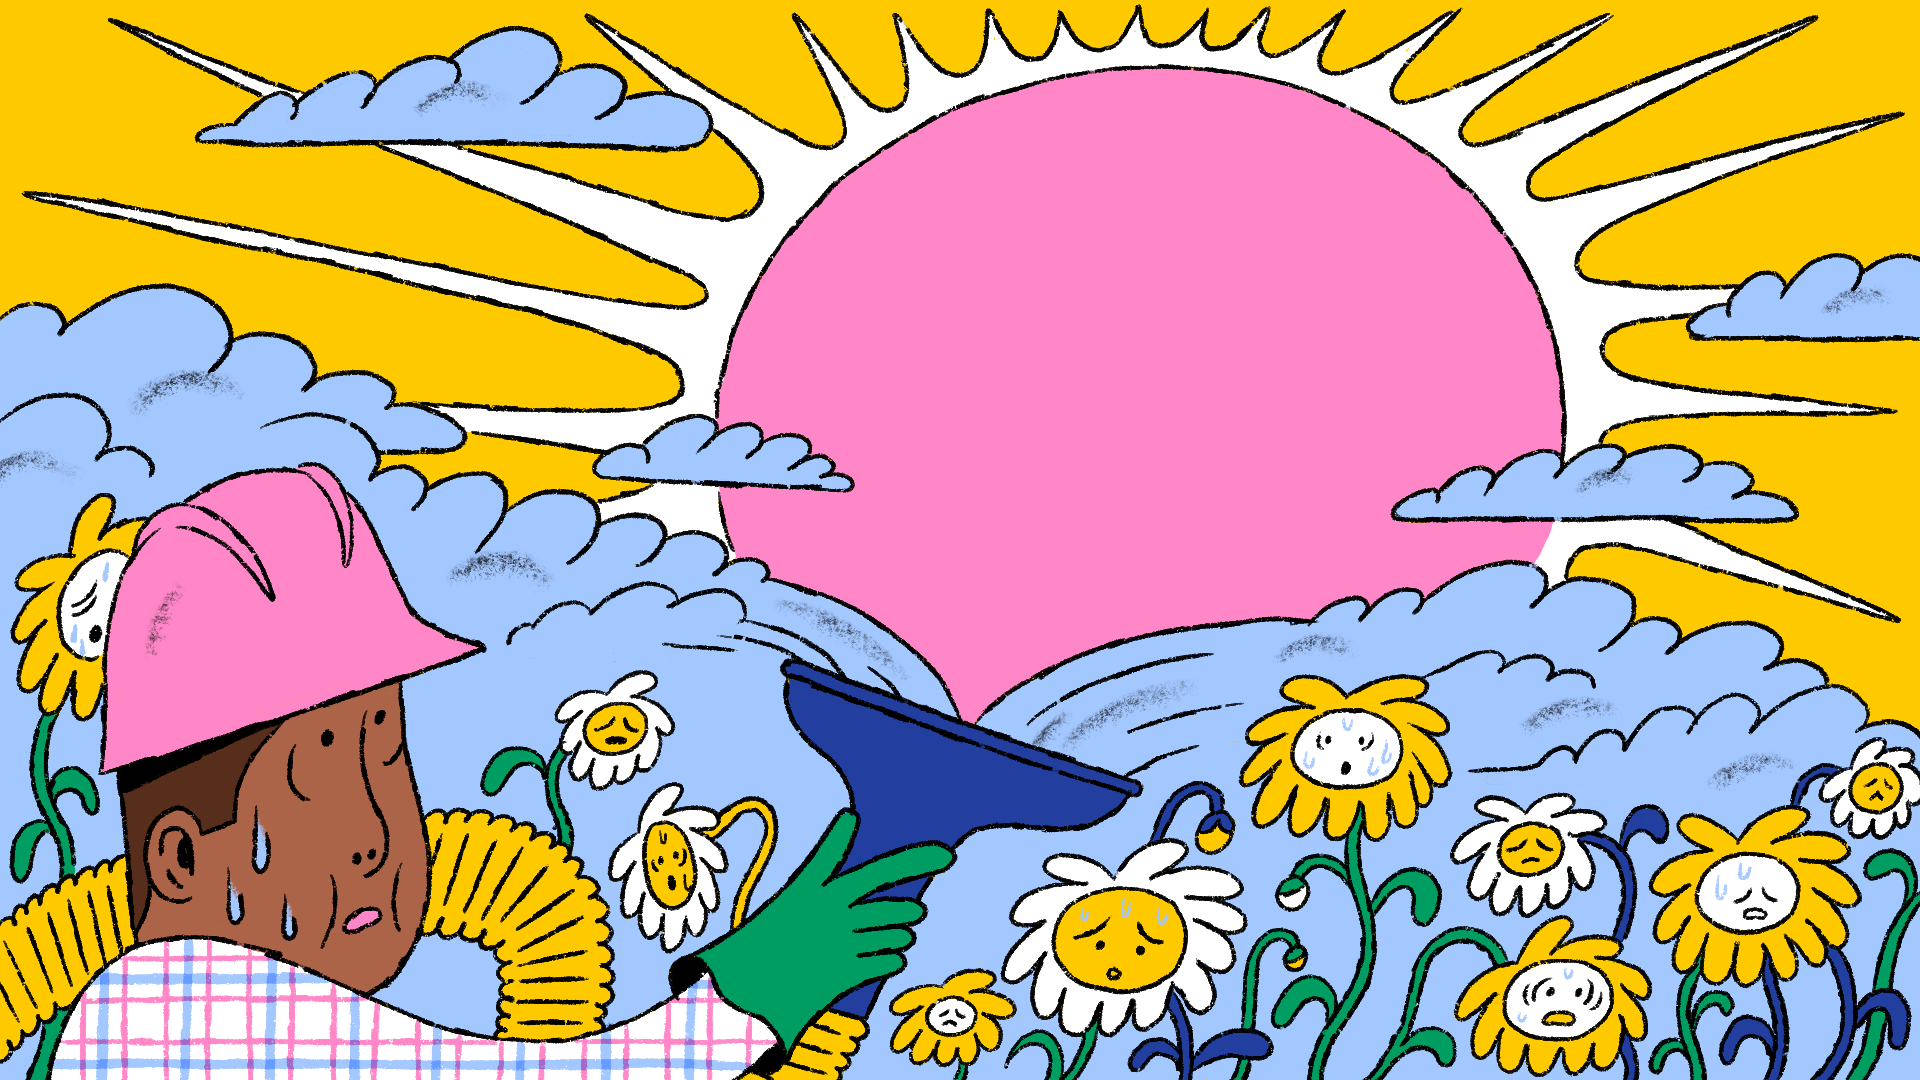 A cartoon drawing of a sweaty person in a hardhat trying to vacuum up clouds from in front of a blazing sun. Exhausted flowers are in the foreground.